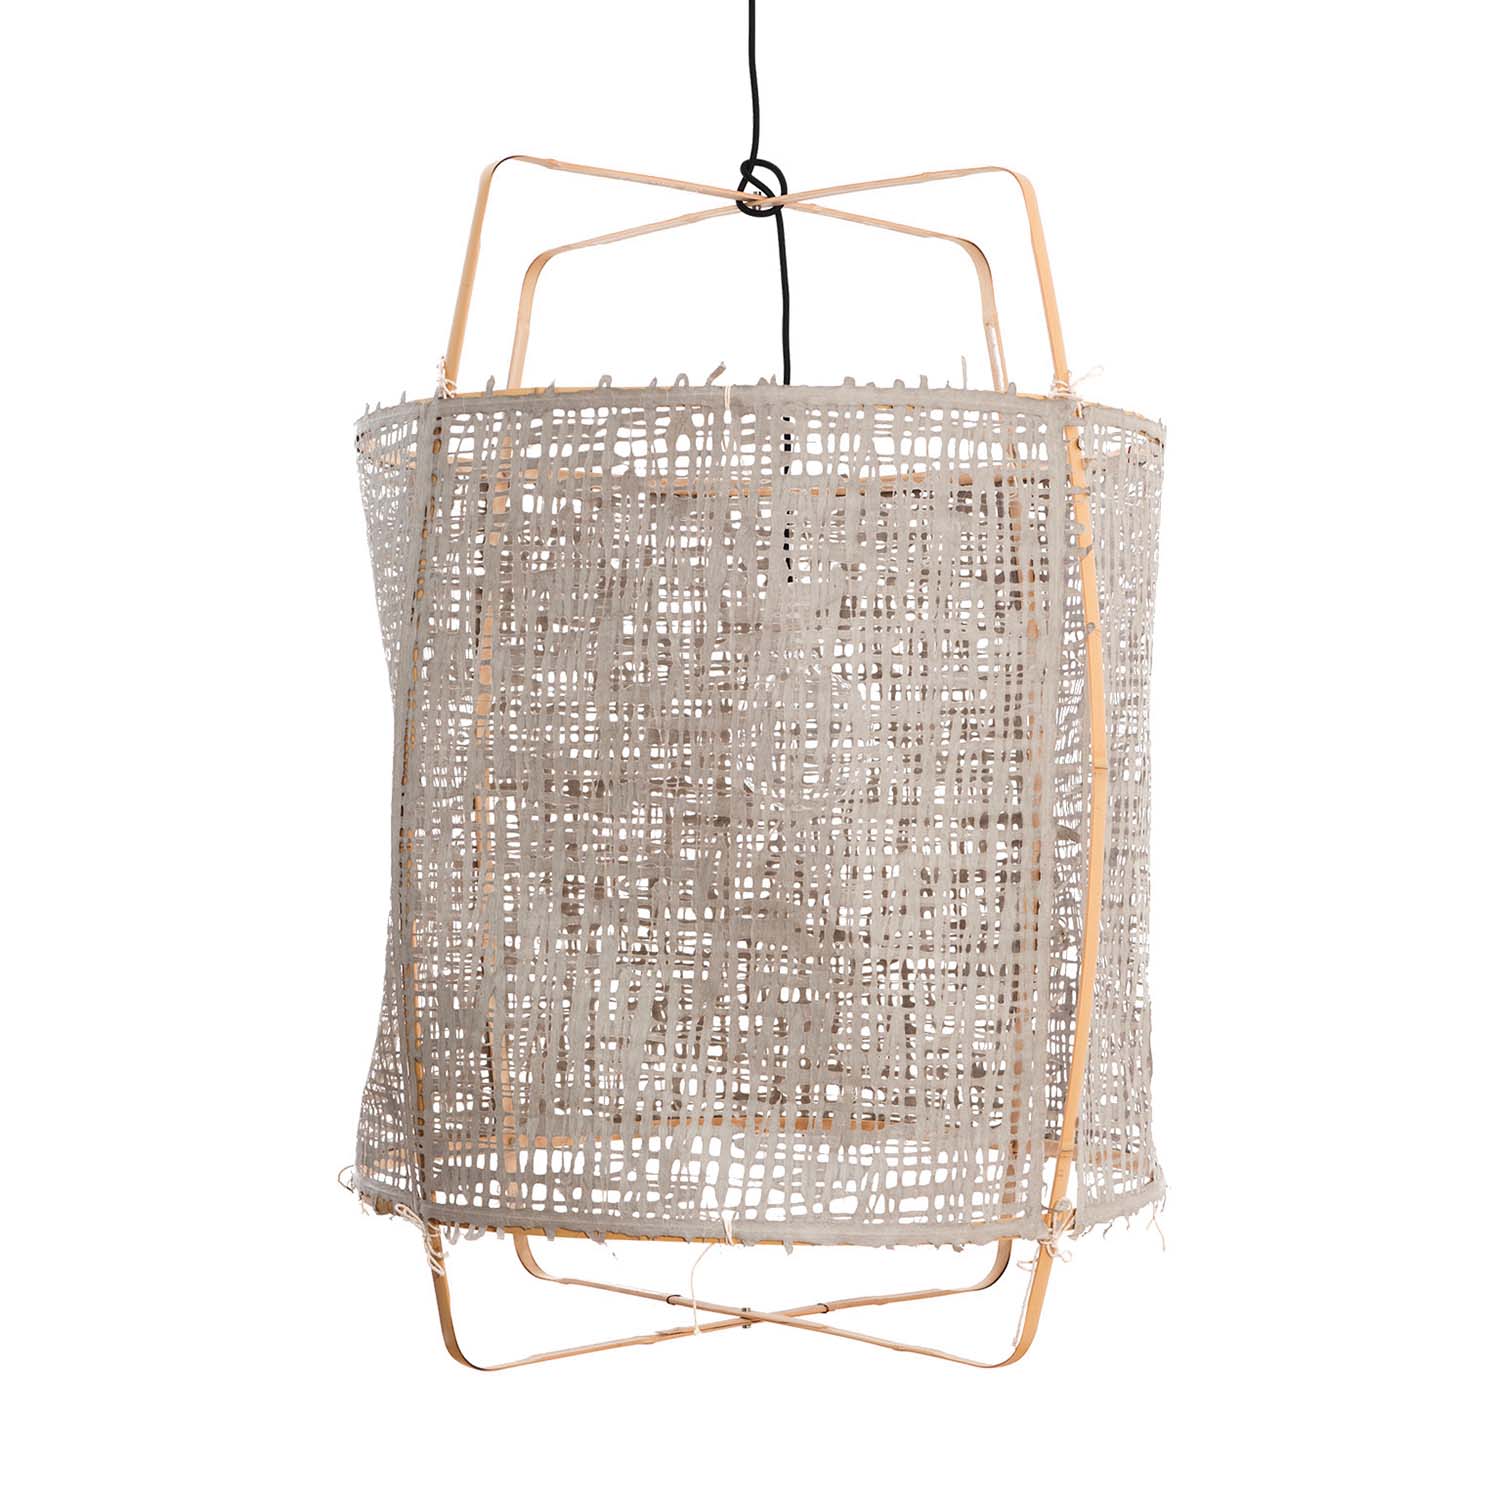 Z2 - Cage pendant light in light bamboo and white, beige, gray or black fabric